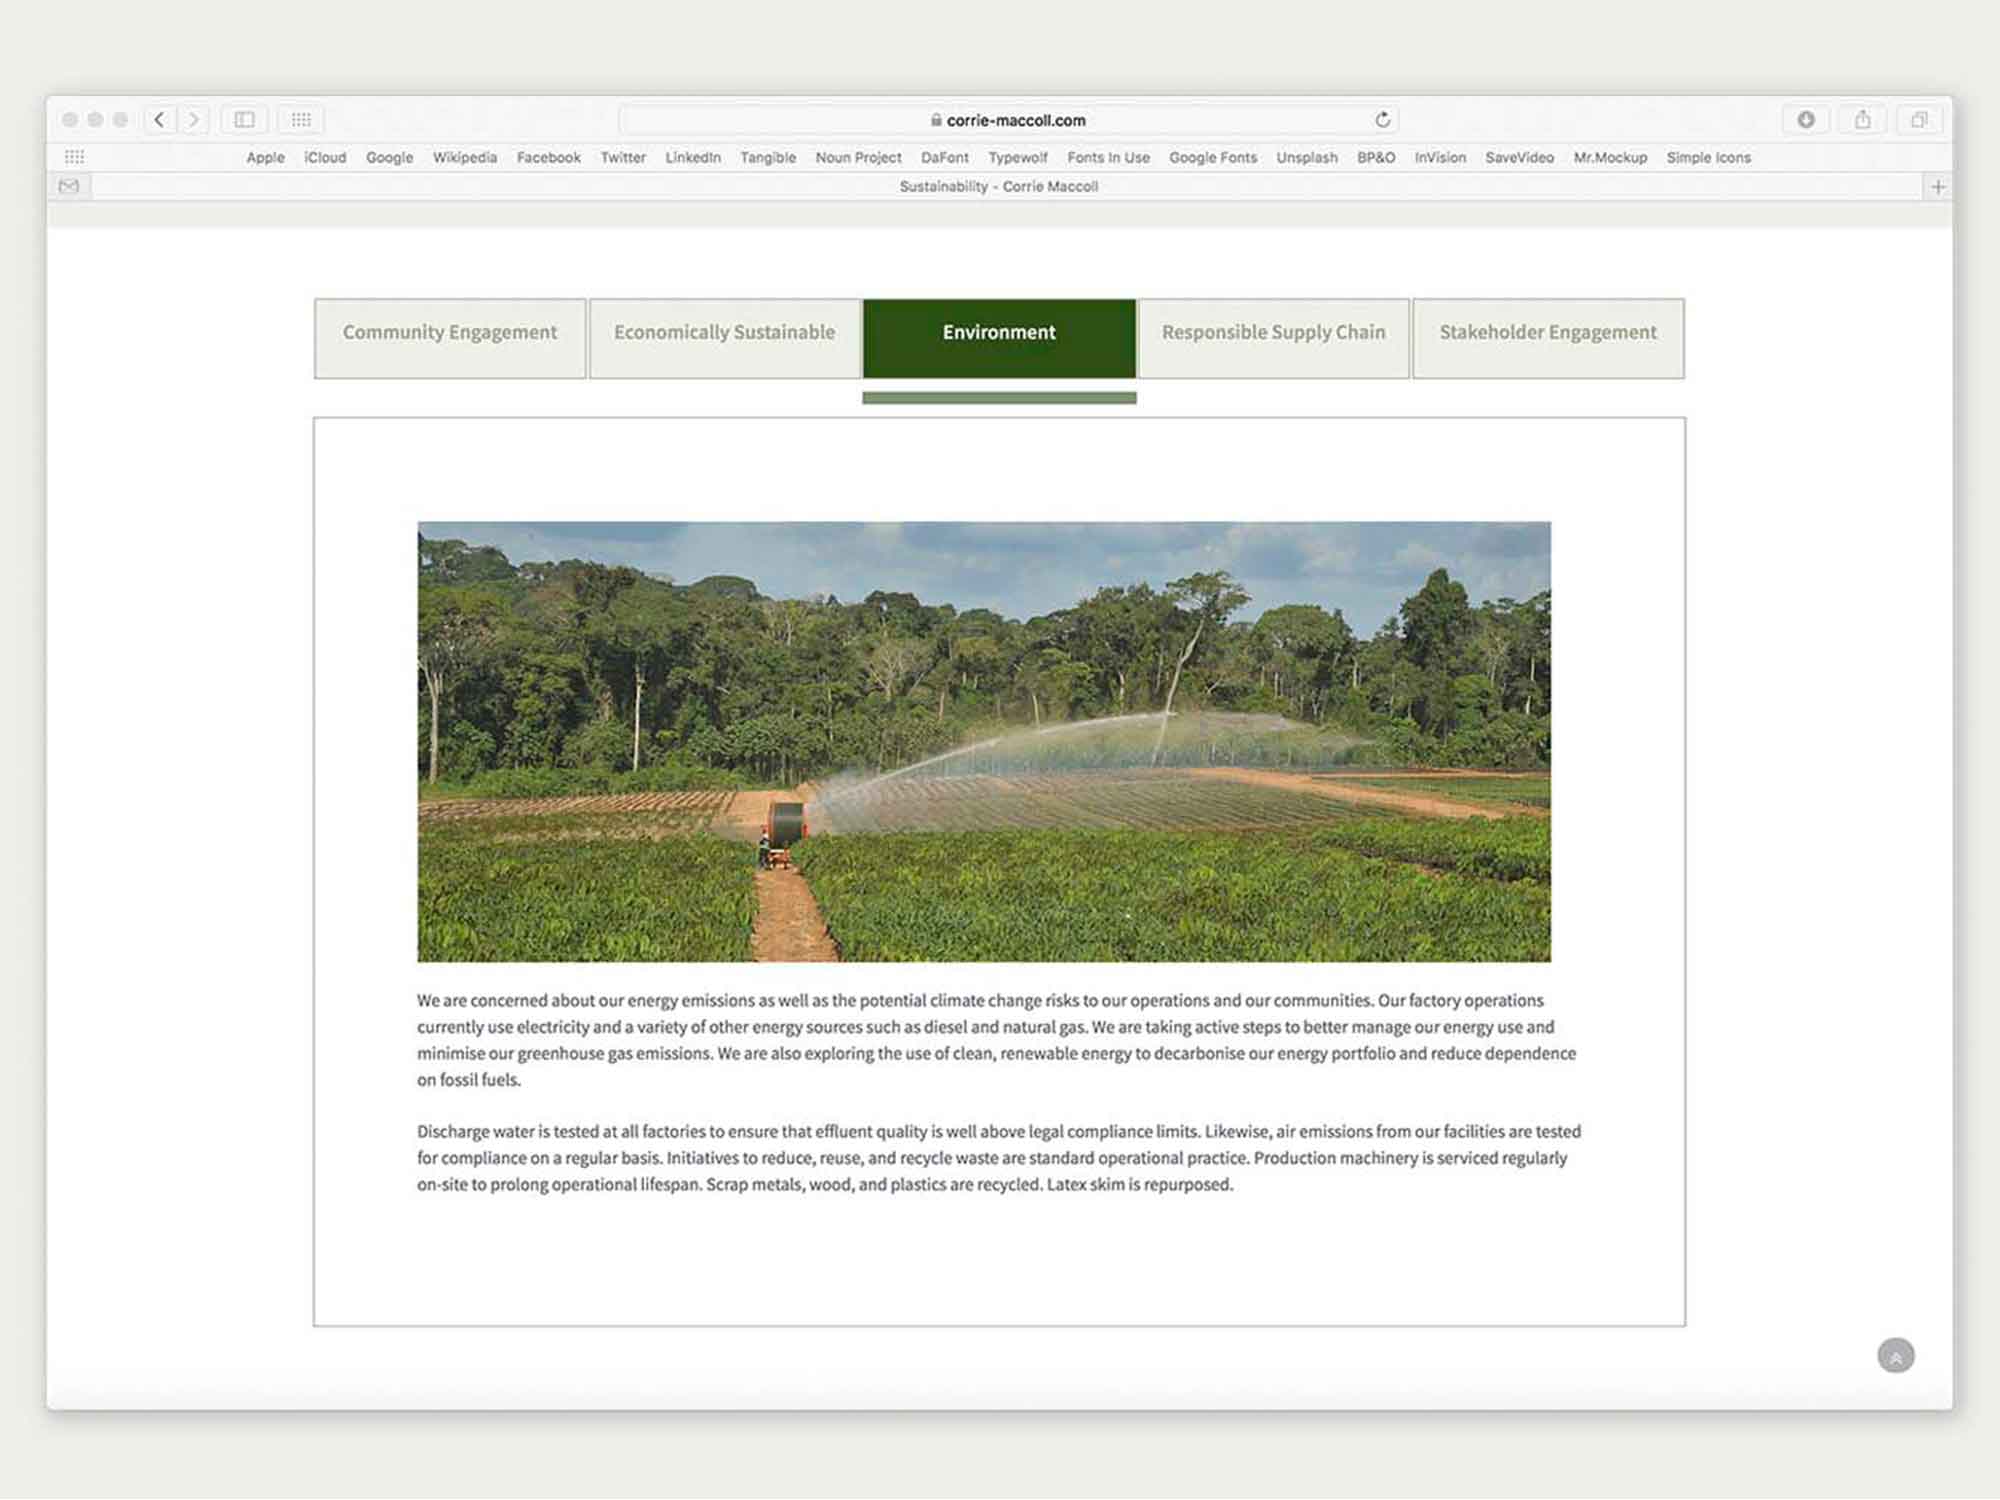 Brand Consultancy in Agriculture Industry. Website Design for Corrie MacColl